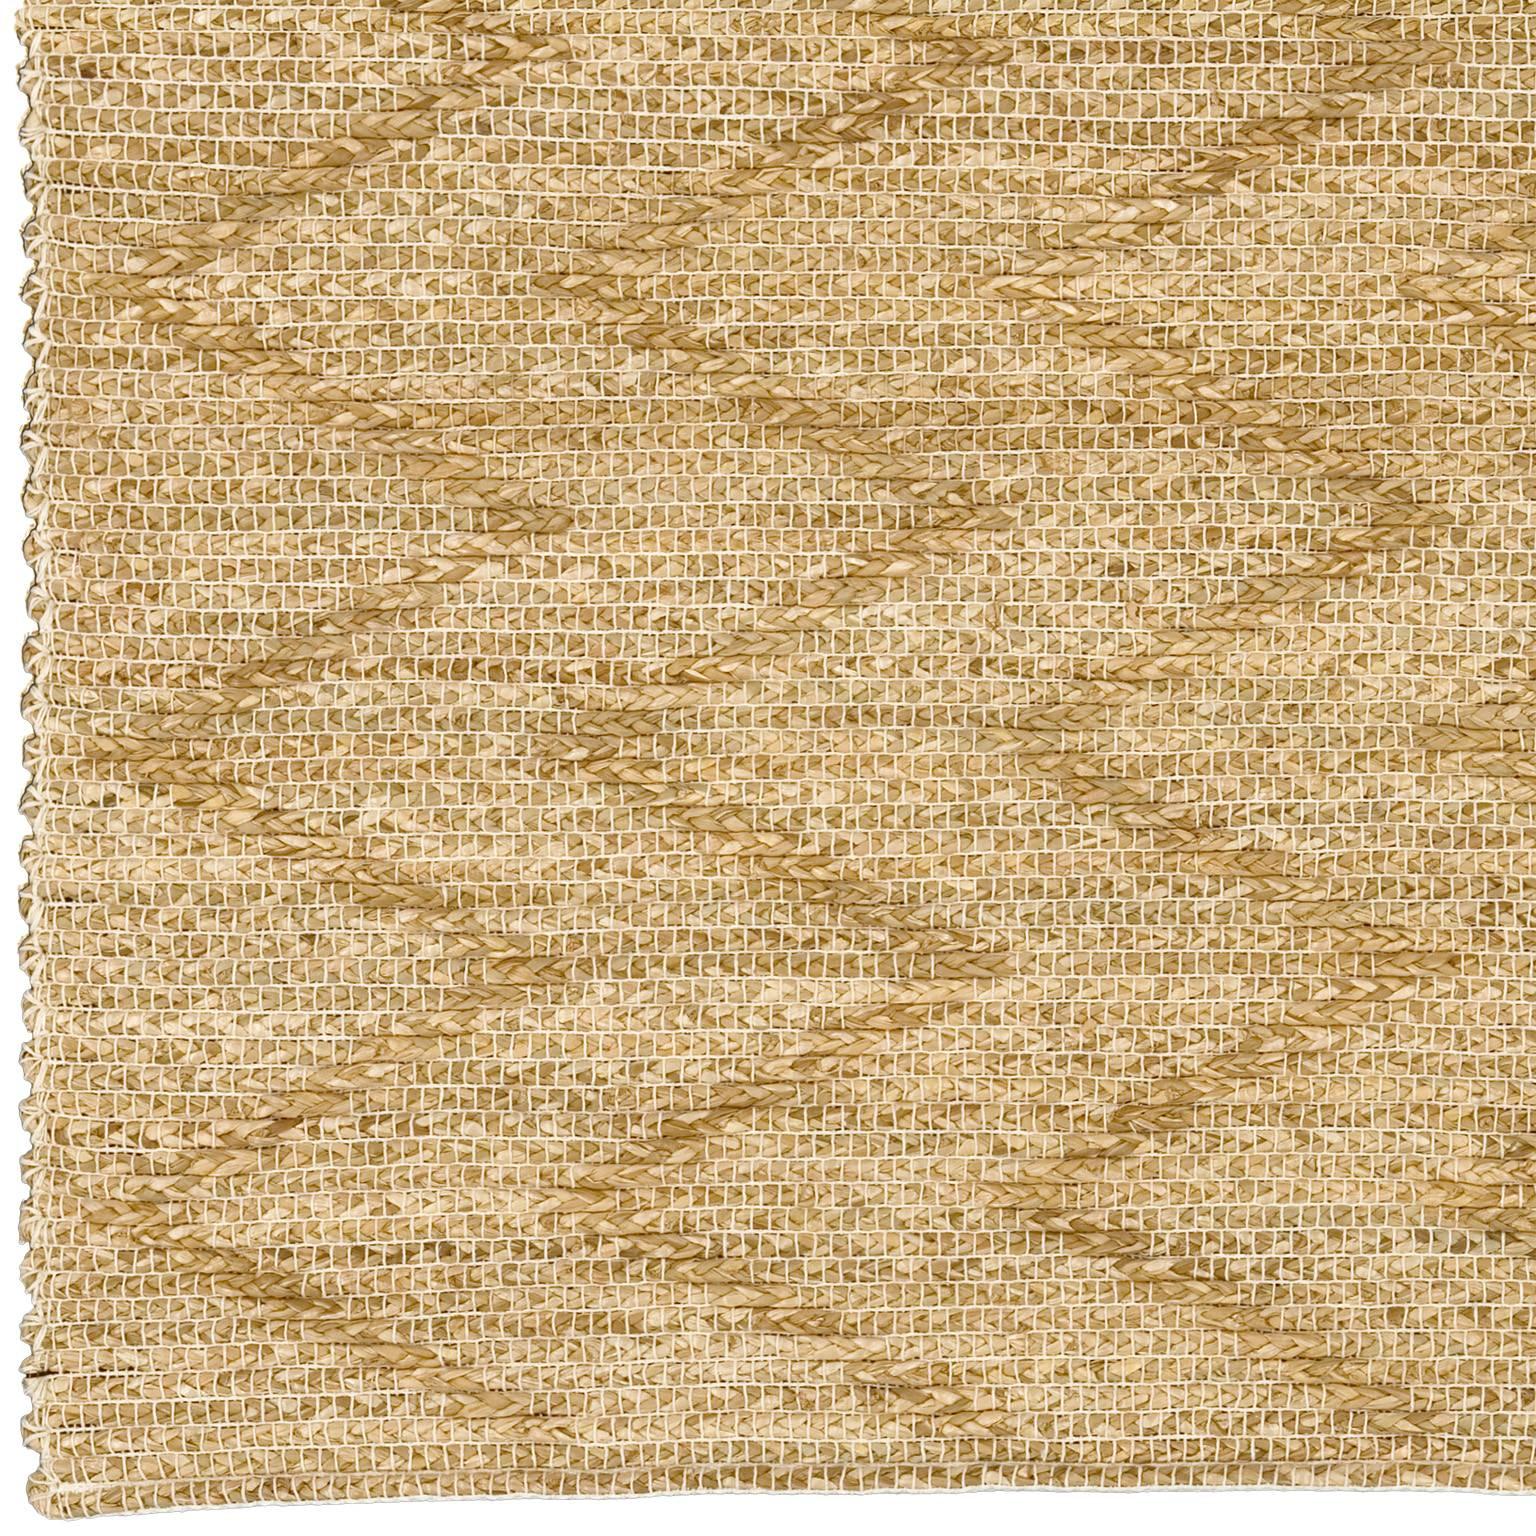 Contemporary South American handwoven mat
South America, circa 2015.
Handwoven, 80% southern cattail, 20% cotton.
